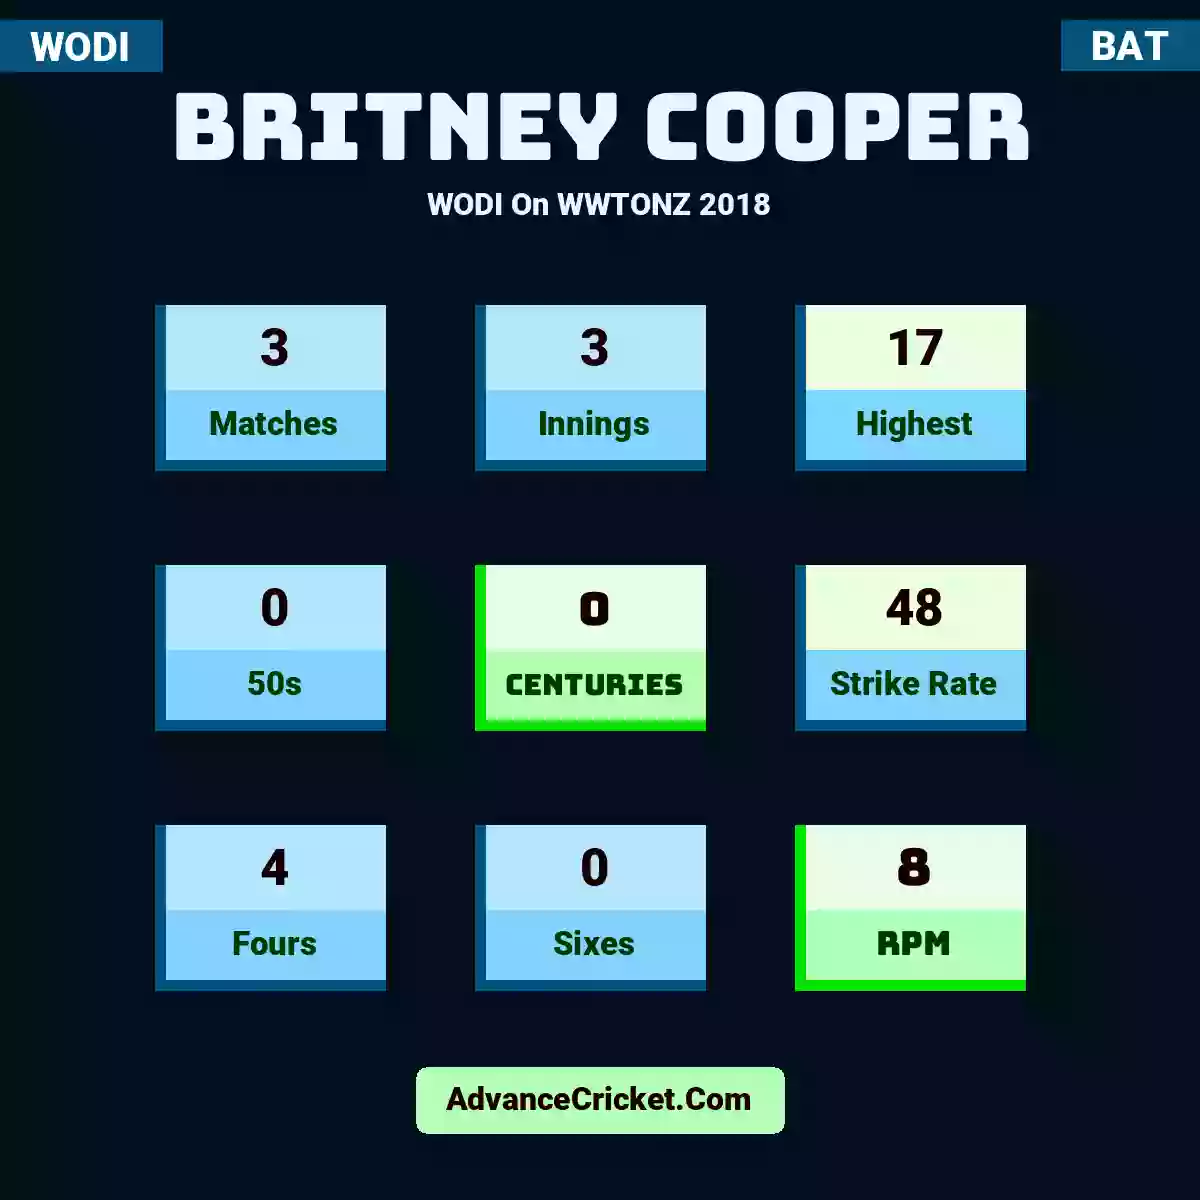 Britney Cooper WODI  On WWTONZ 2018, Britney Cooper played 3 matches, scored 17 runs as highest, 0 half-centuries, and 0 centuries, with a strike rate of 48. B.Cooper hit 4 fours and 0 sixes, with an RPM of 8.